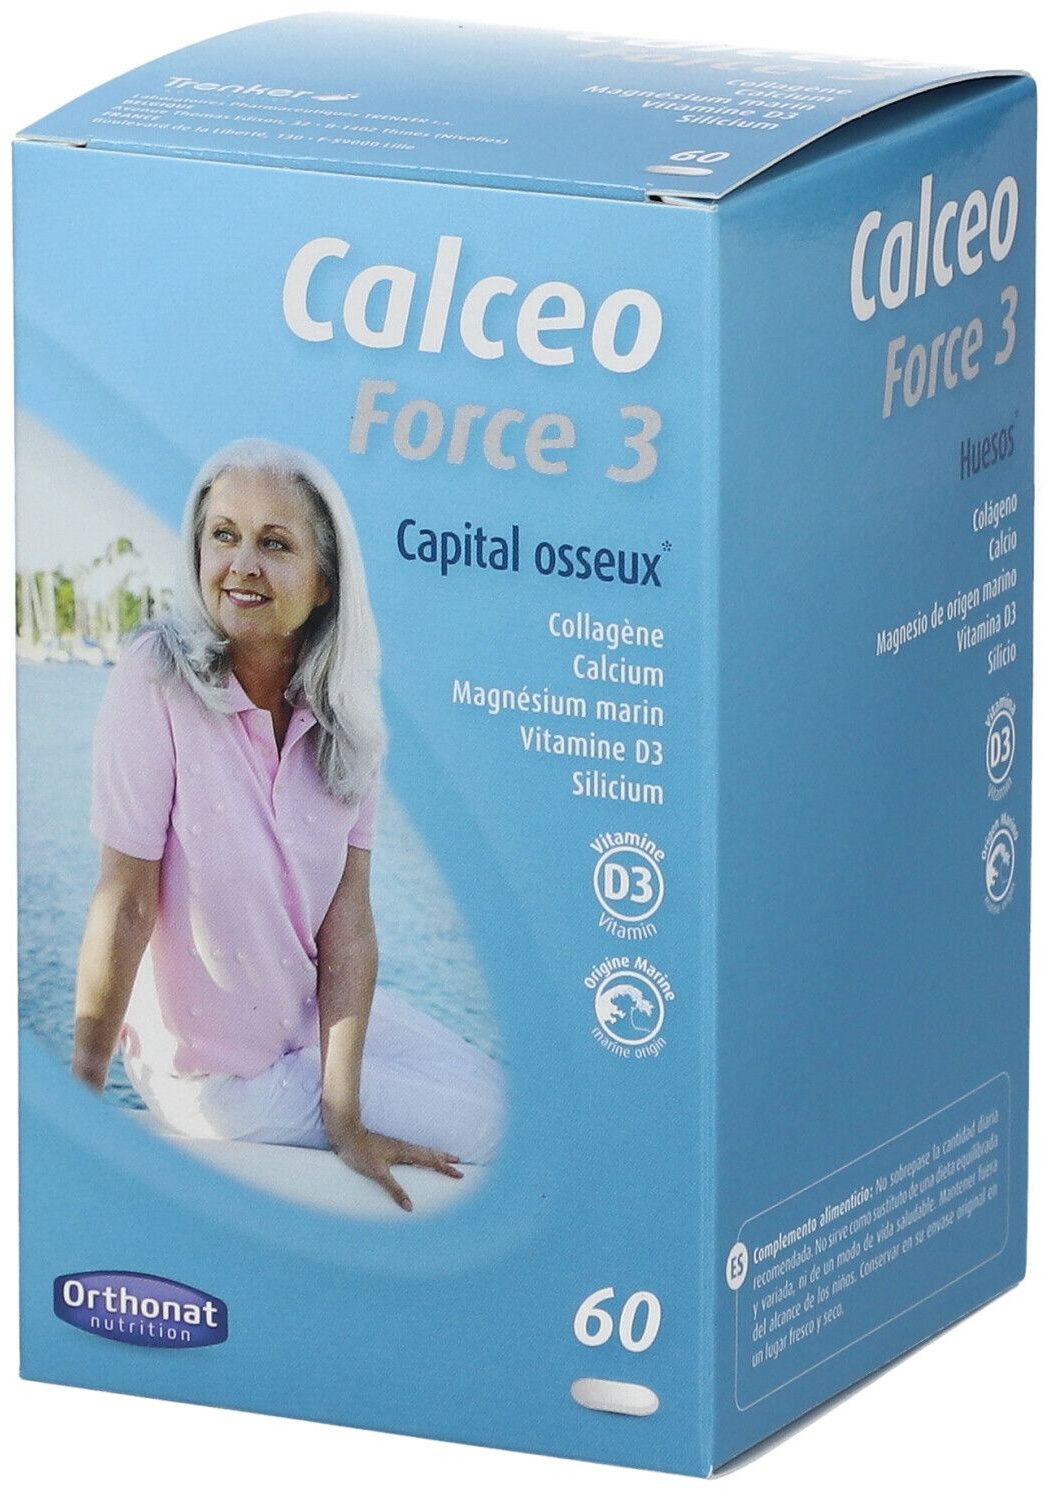 Calceo Force 3